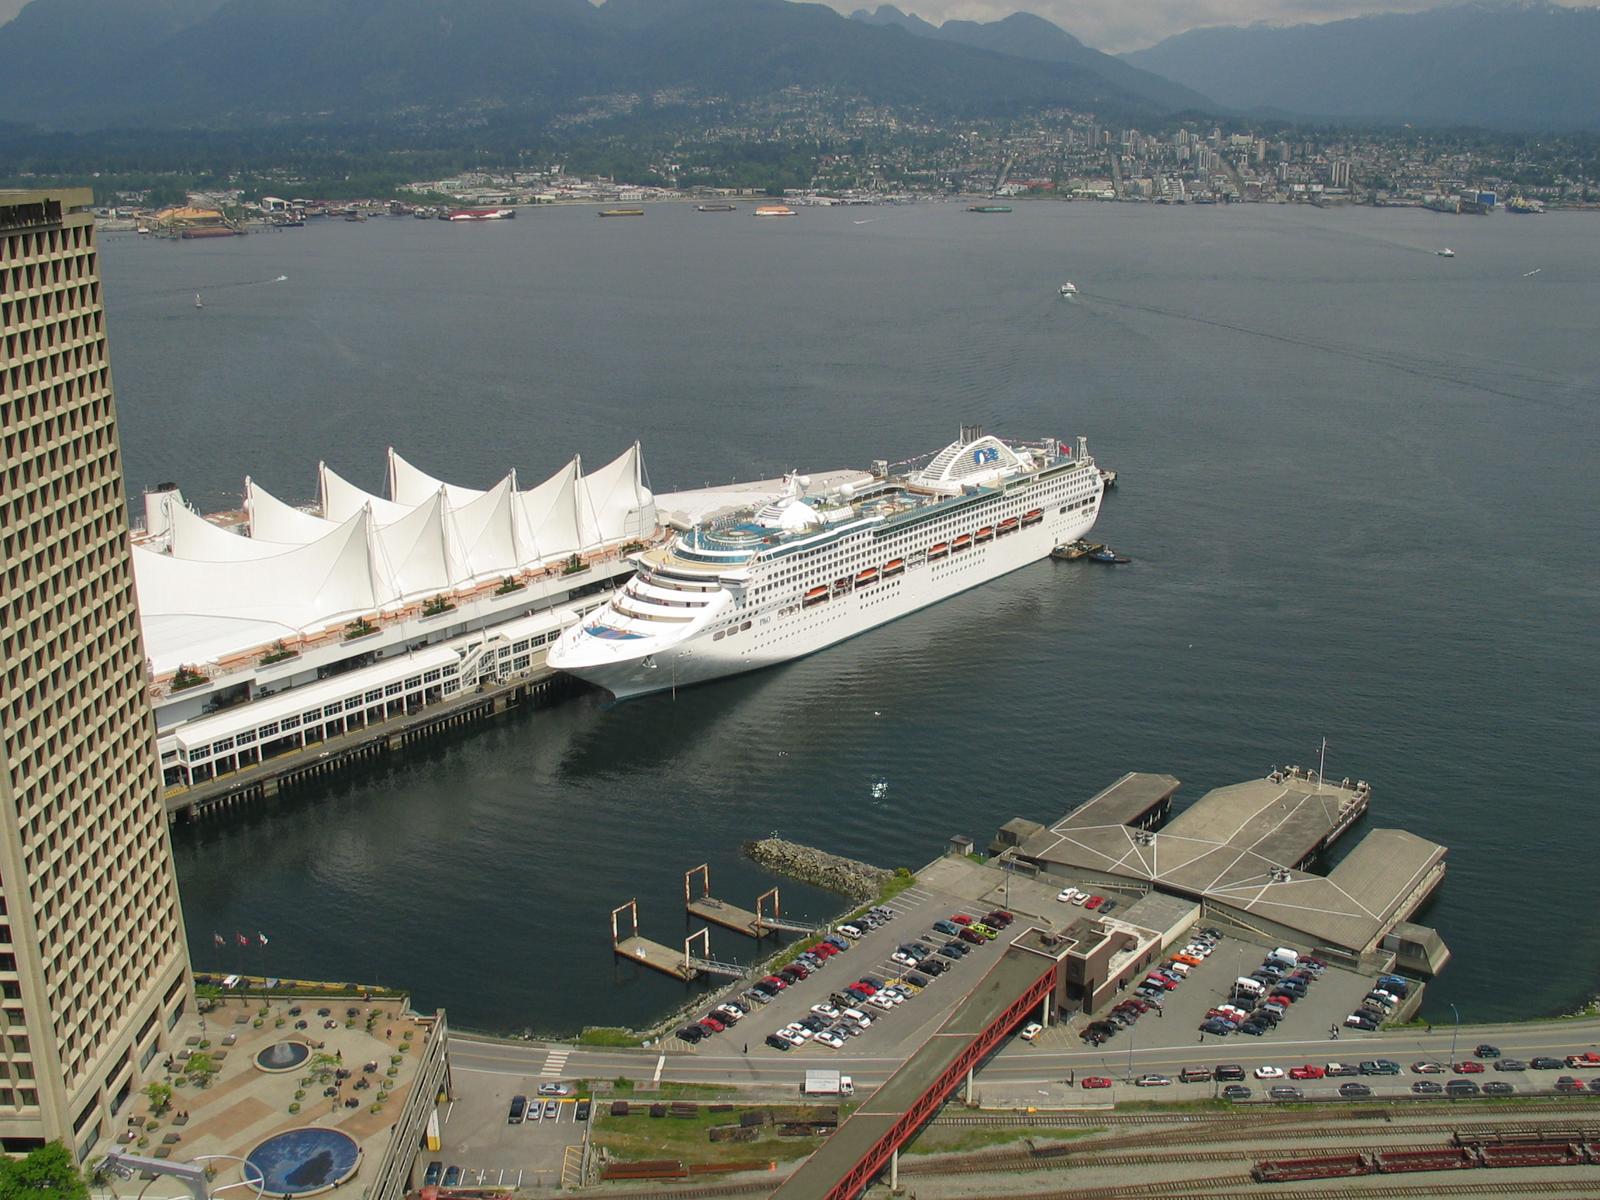 Canada place